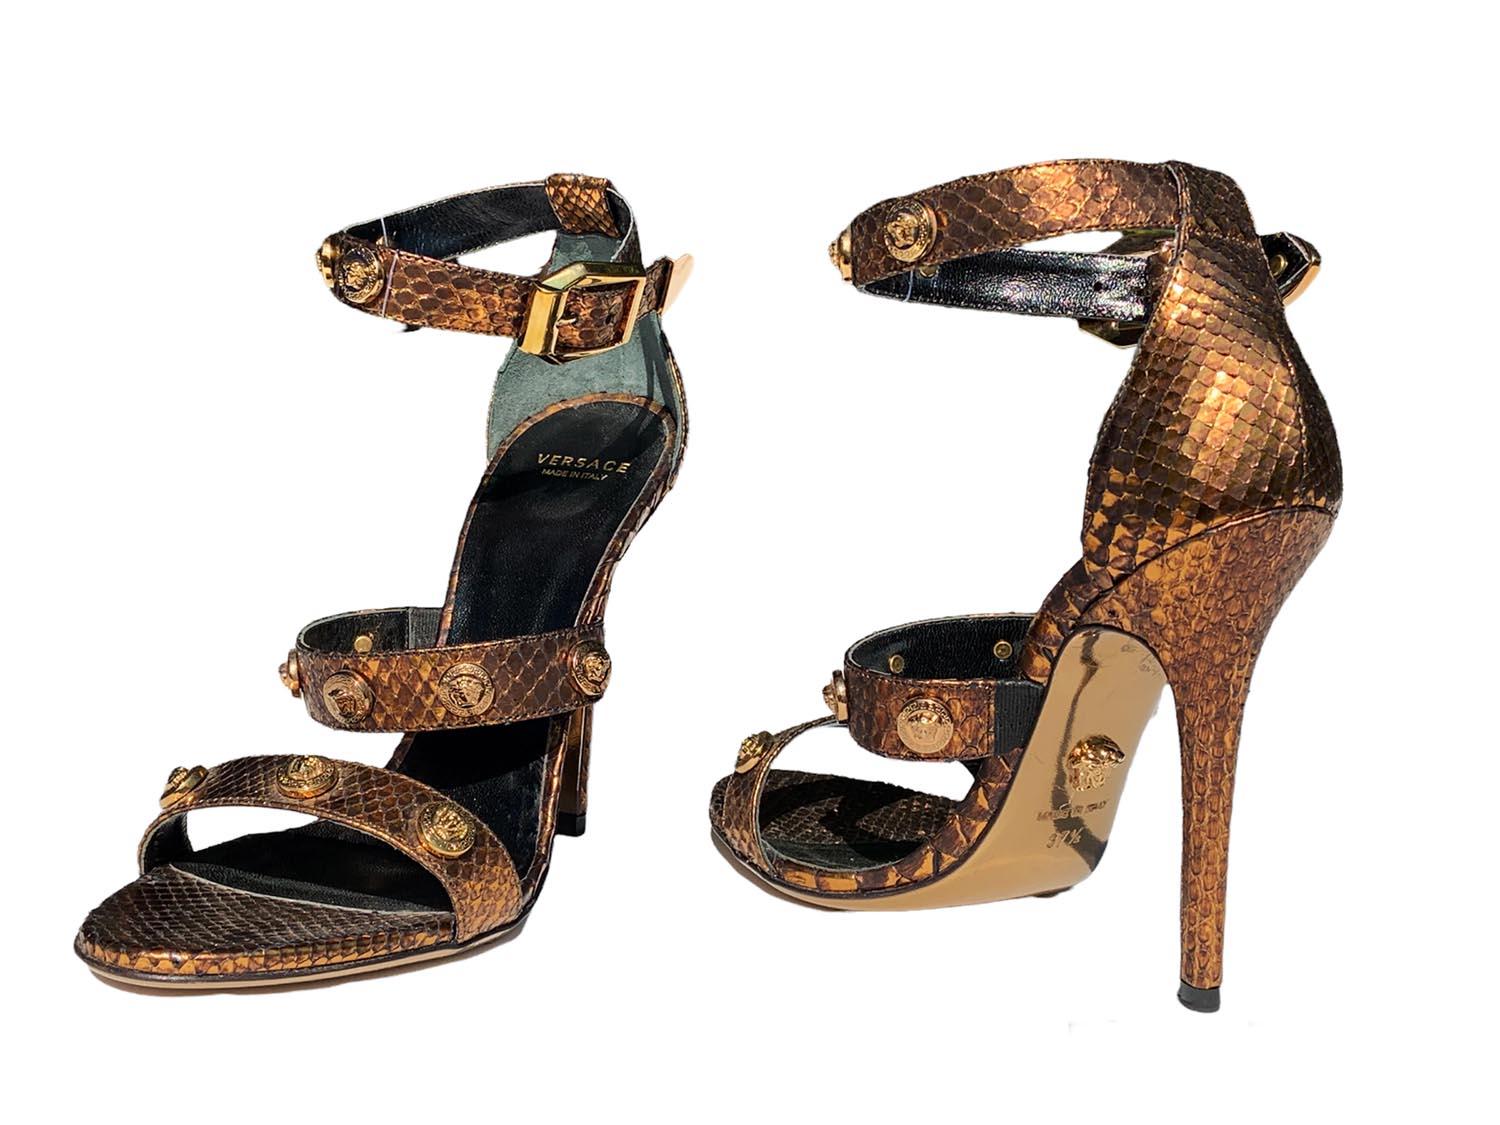 New Versace *Signature* Bronze Tone Medusa Python Sandals
Designer size 37.5 - US 7.5
Bronze Tone Real Python, Medusa Embellishment Throughout, Ankle Strap with Buckle Fastening, Bronze Color Leather Sole.
Stiletto Heel Height - 4.5 inches
Made in